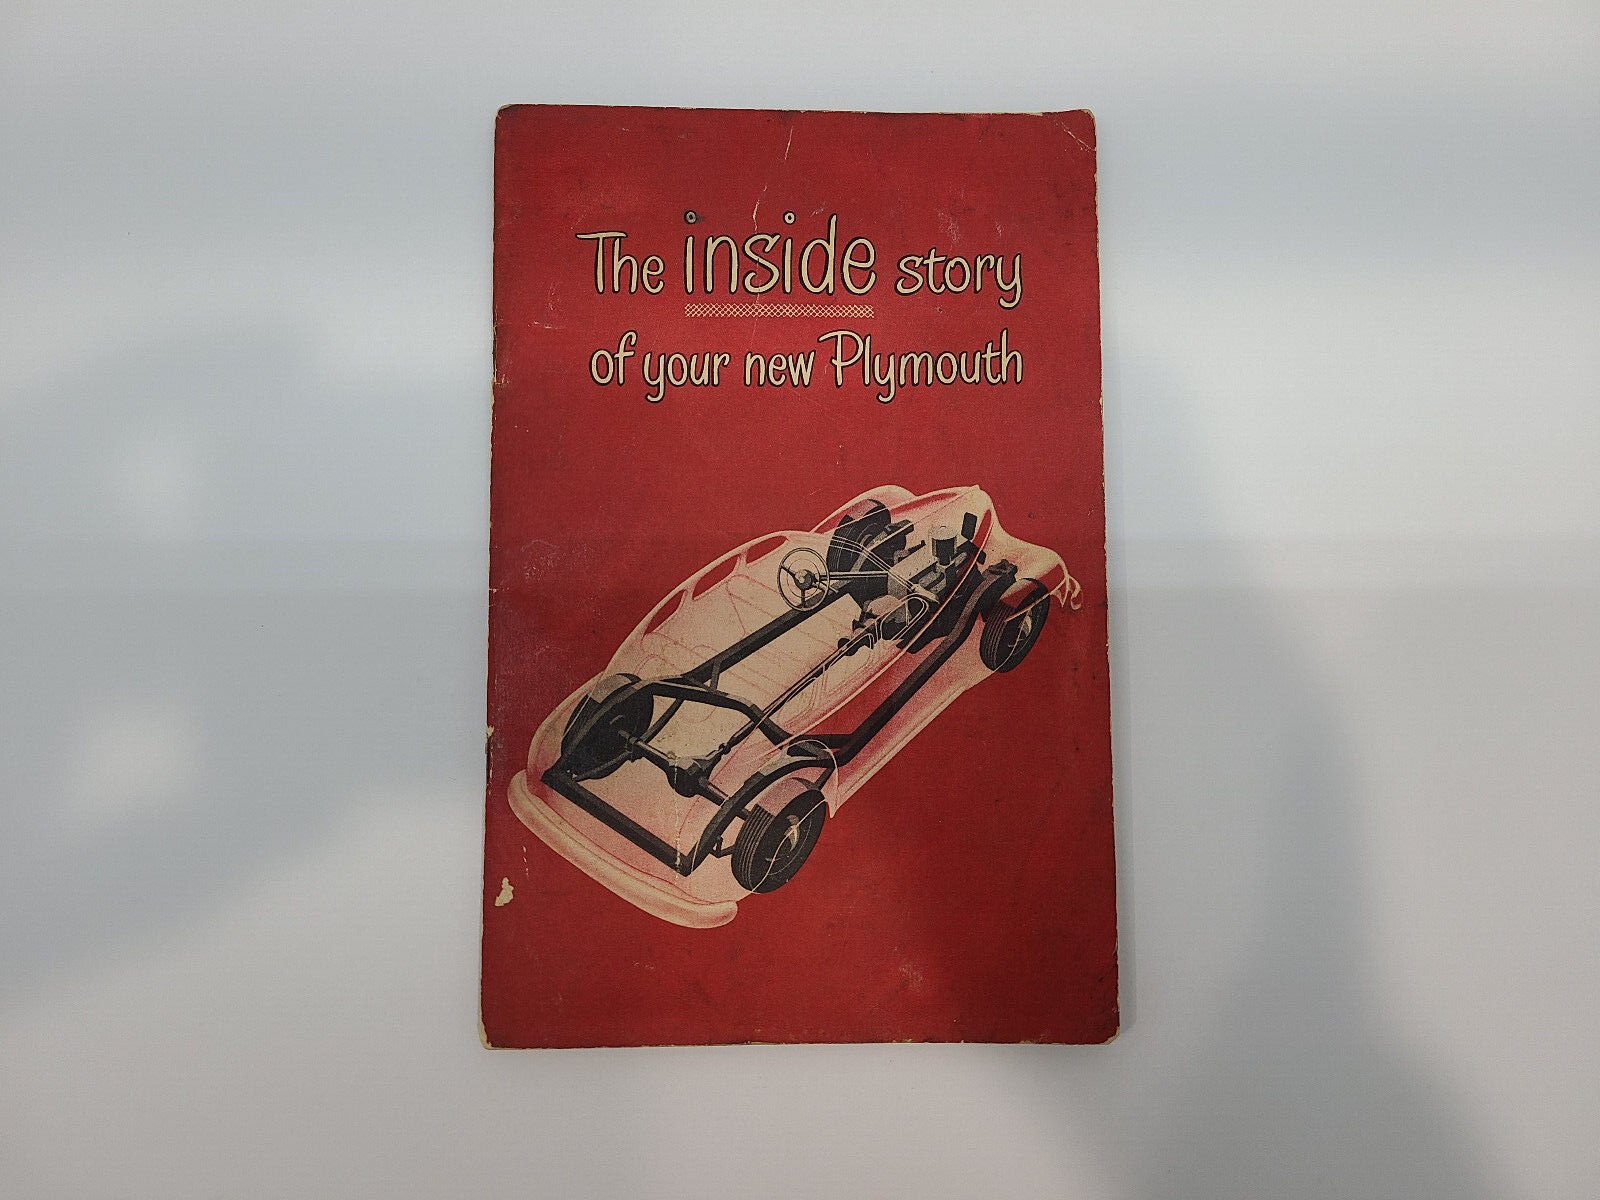 1946 1947 1948 Plymouth brochure - The inside story of your new Plymouth